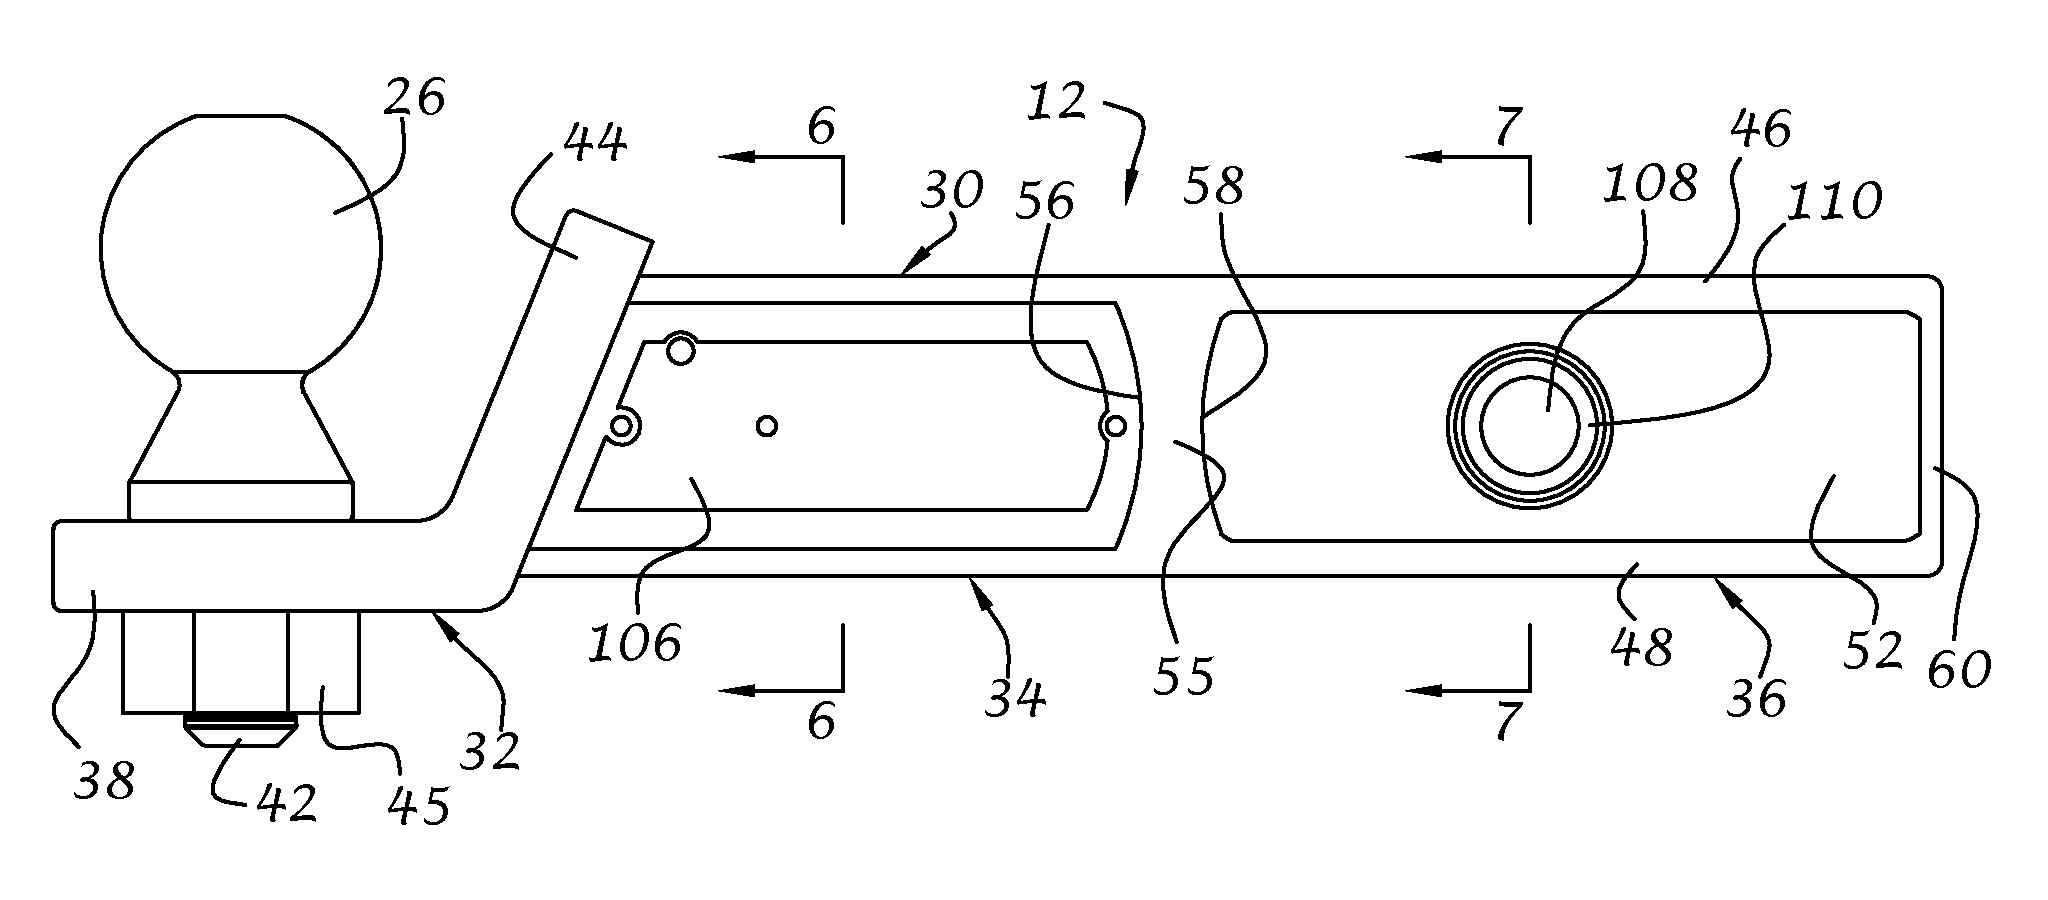 System and method for gauging safe towing parameters